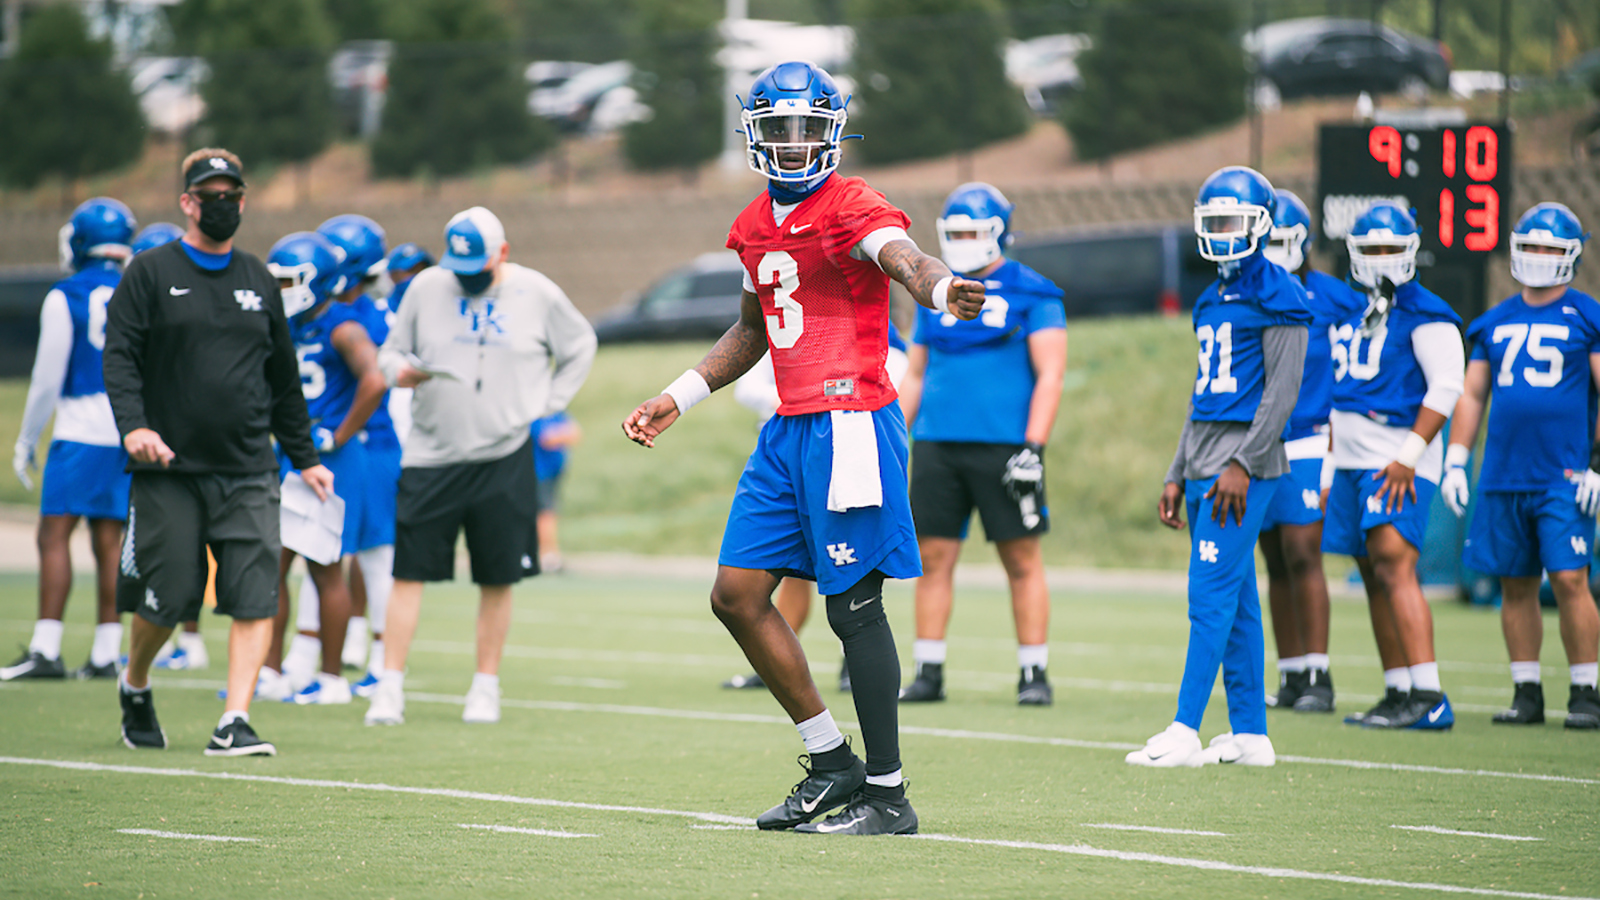 Fooball Practice Photo Gallery (Aug. 18)